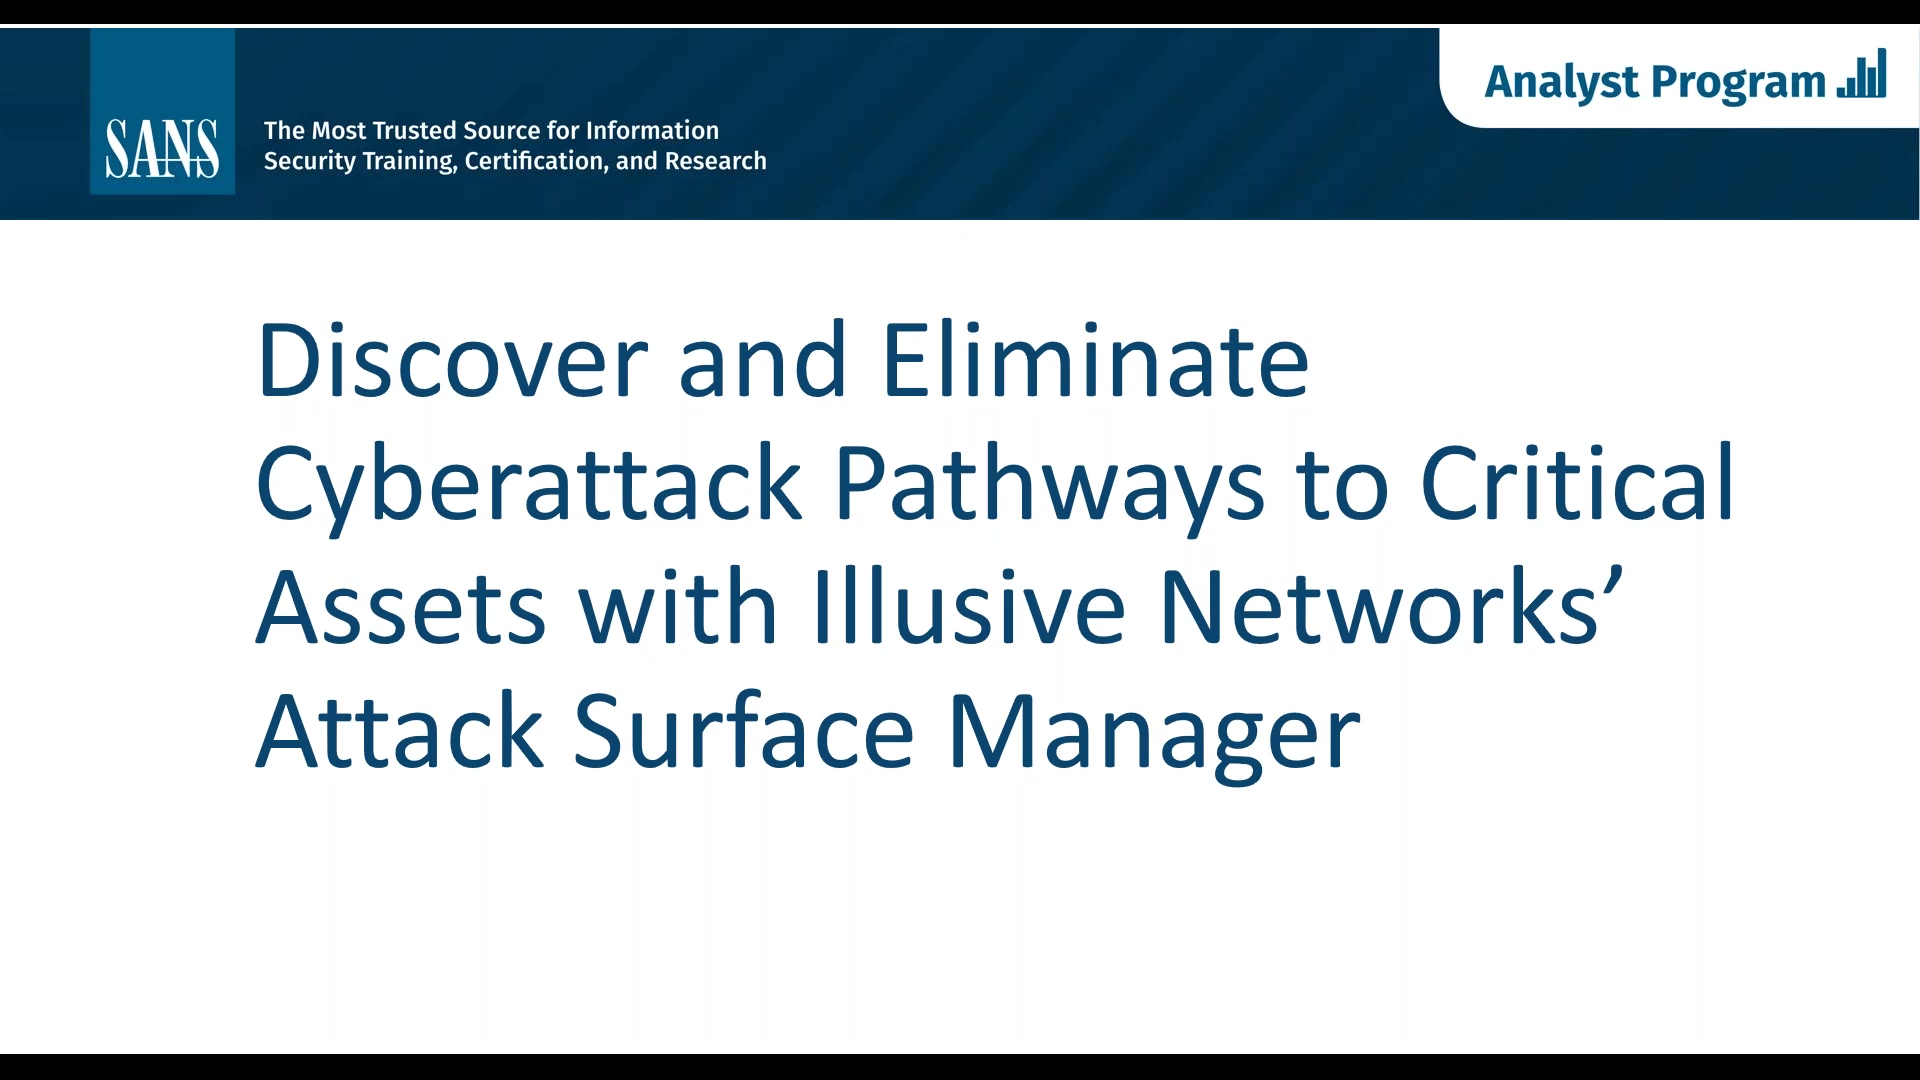 Discover and Eliminate Cyberattack Pathways to Critical Assets with Illusive Networks Attack Surface